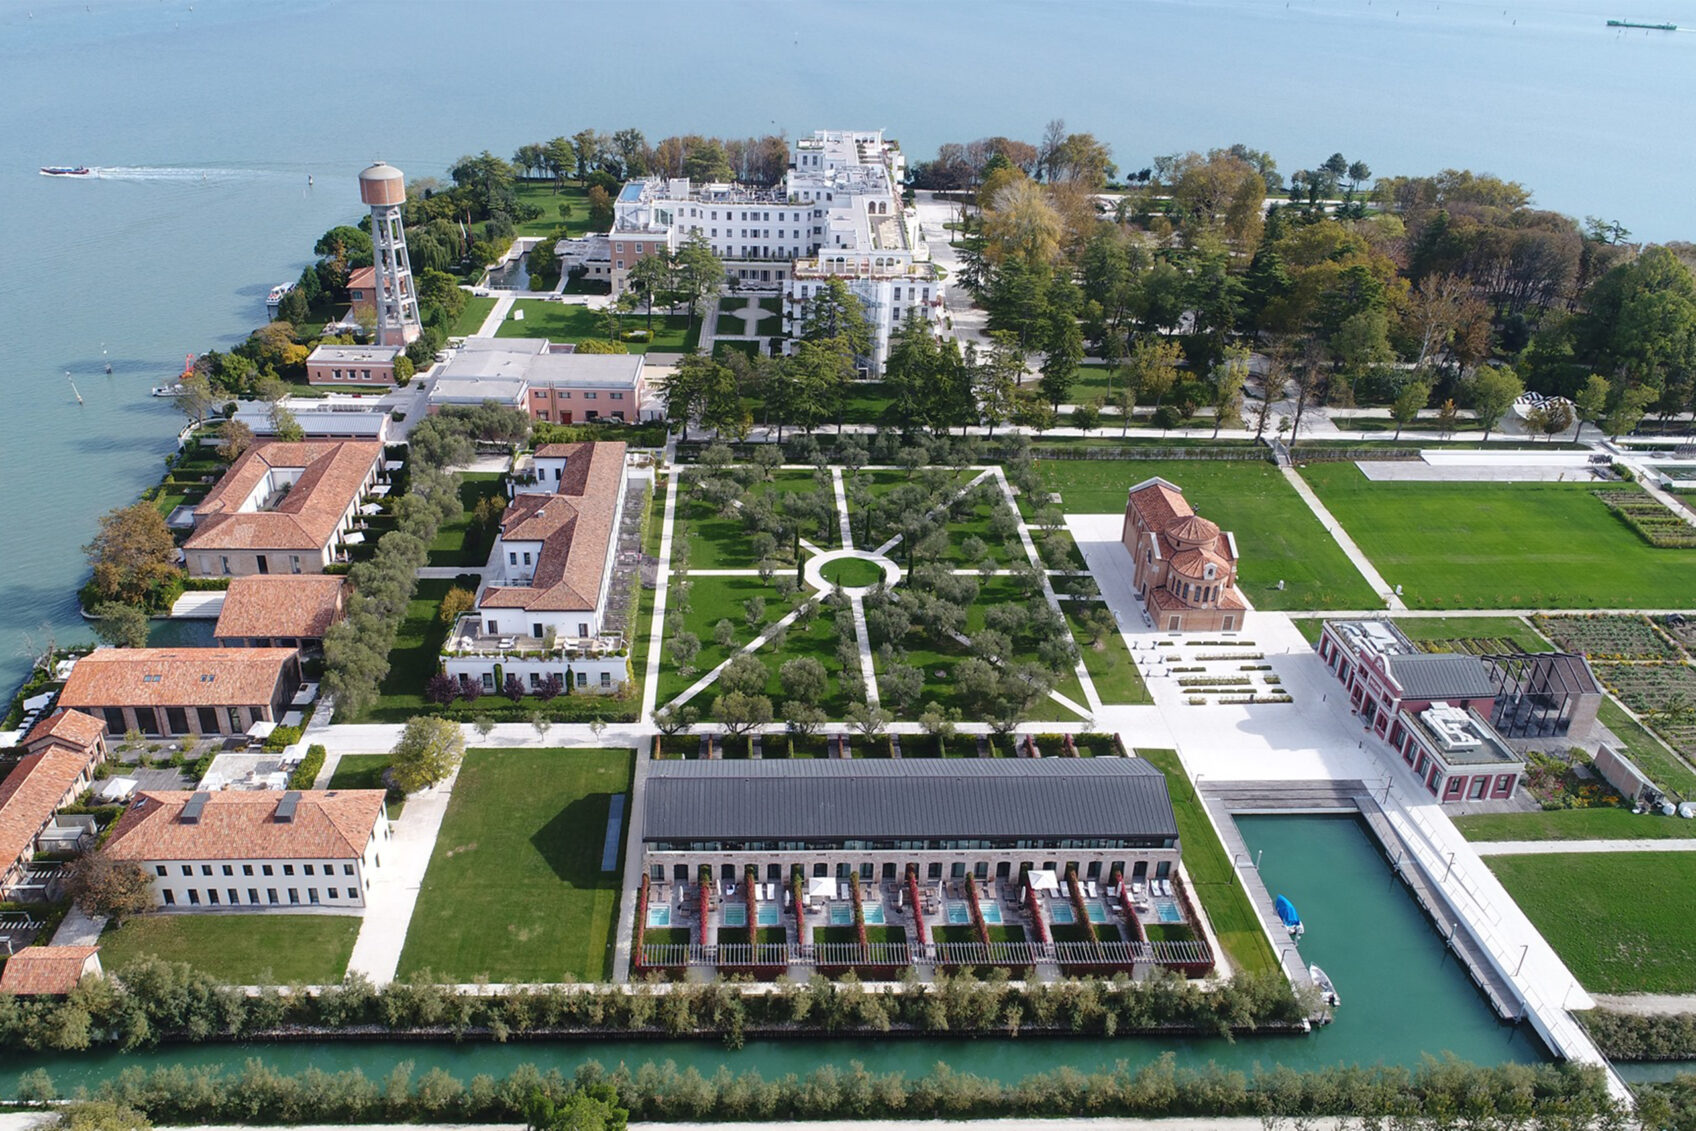 Bird's eye view of the JW Marriott Resort and spa on the island of Sacca Sessola Venice